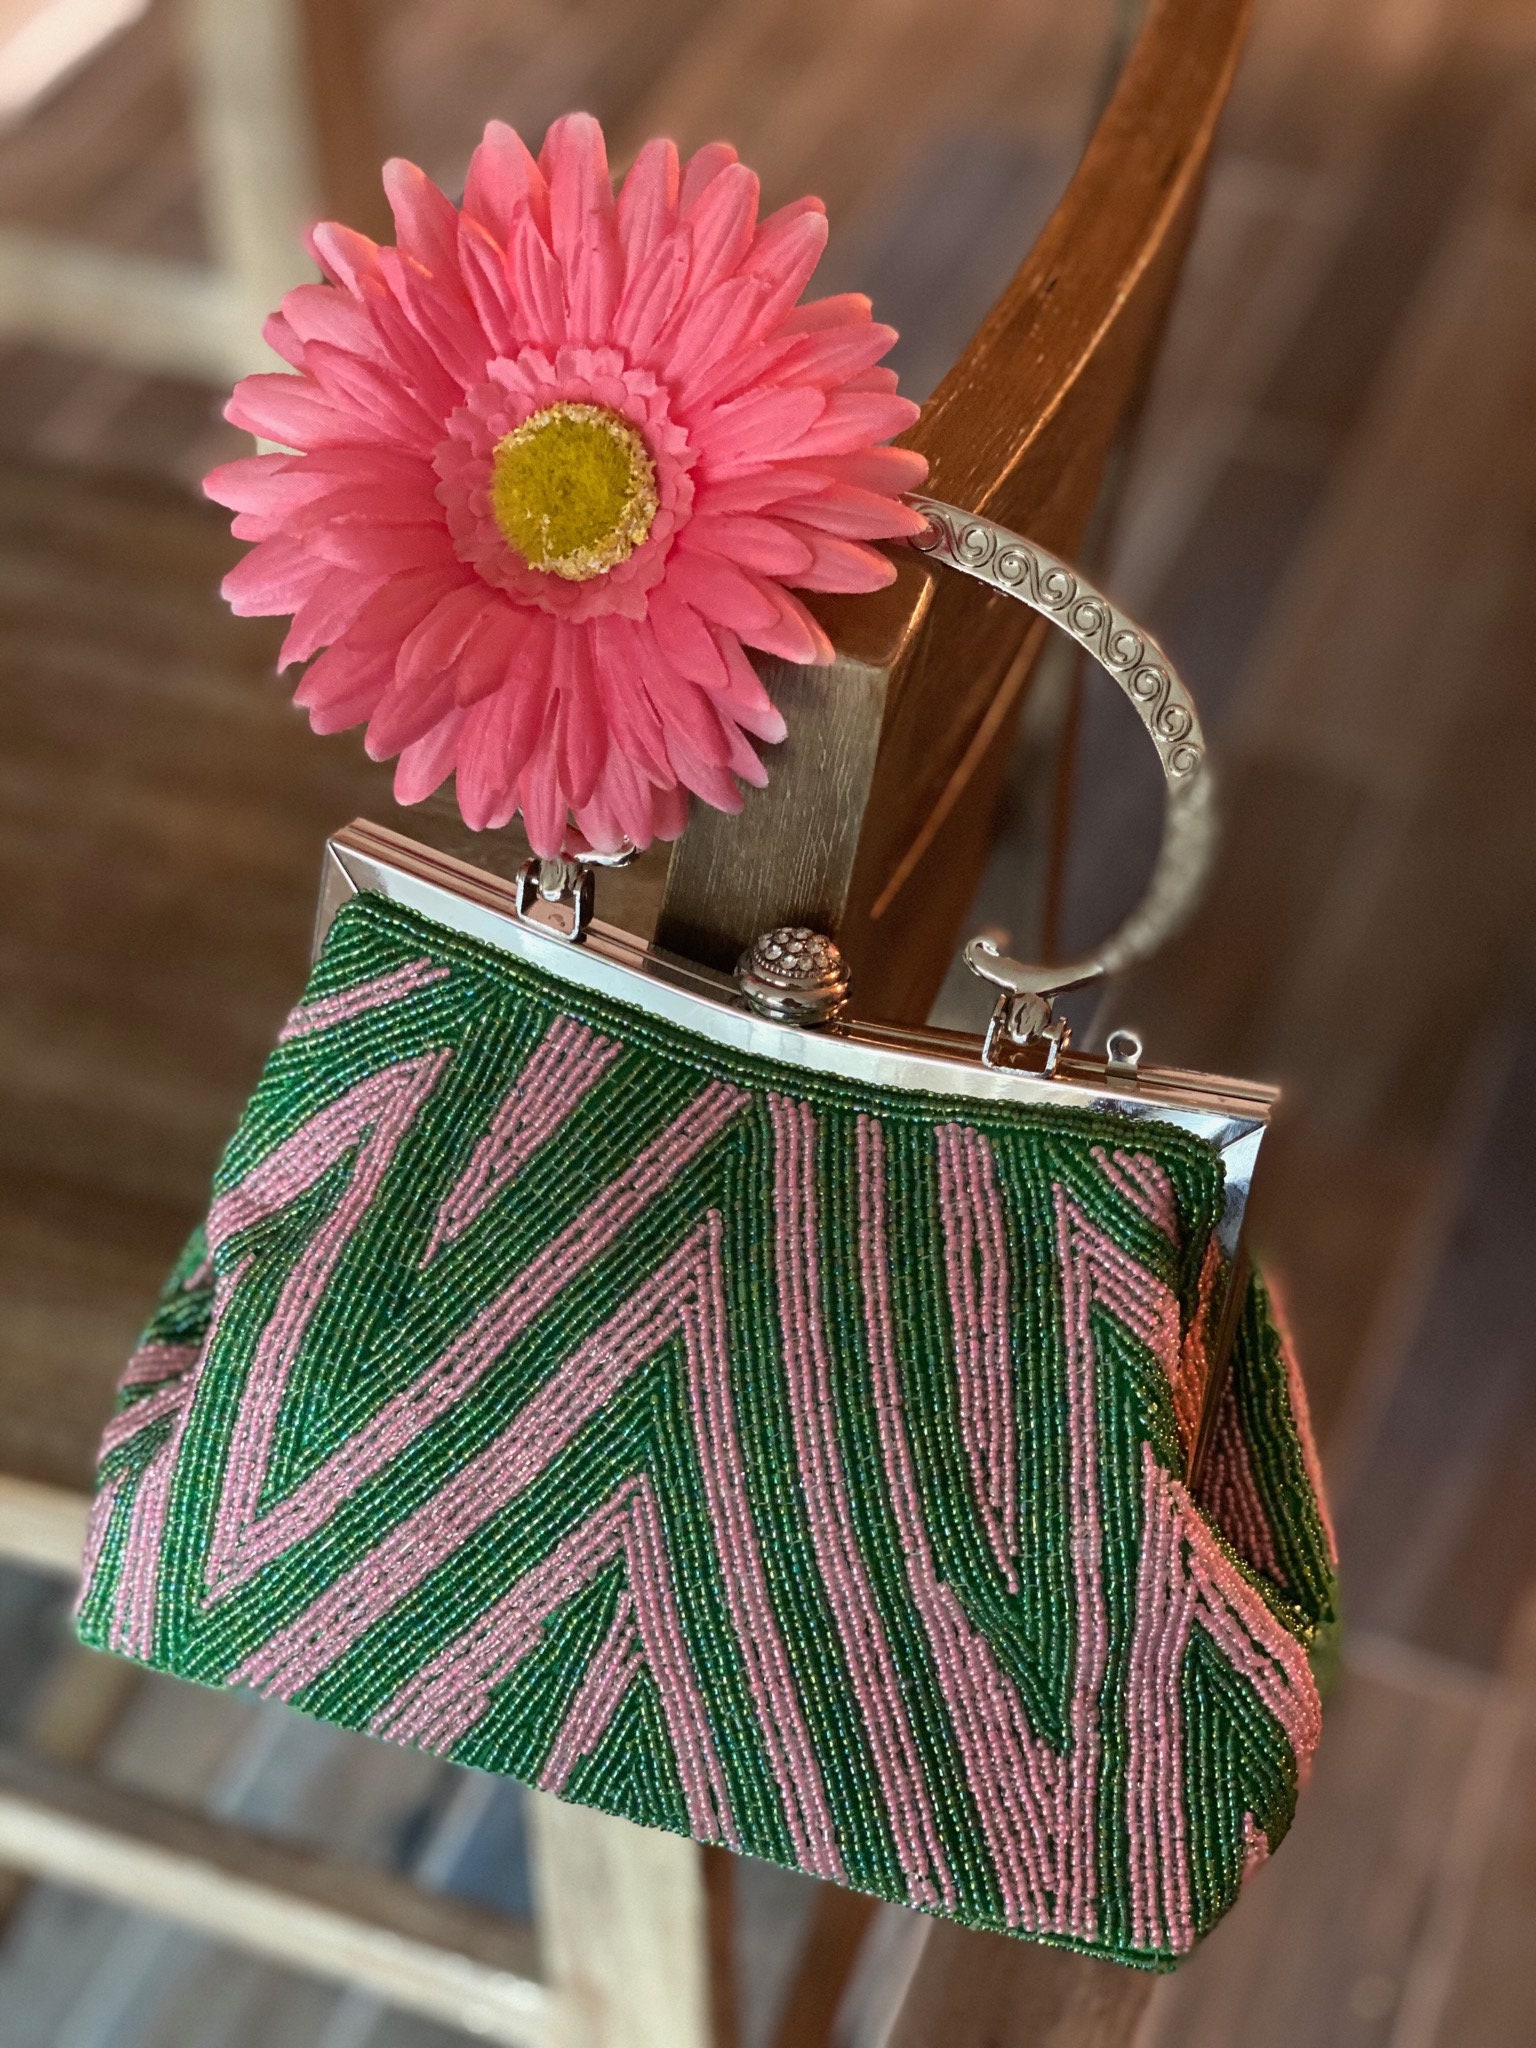 Green Floral Print Dress - Pretty Little Shoppers | Pink handbags, Pink  bags outfit, Pink bag